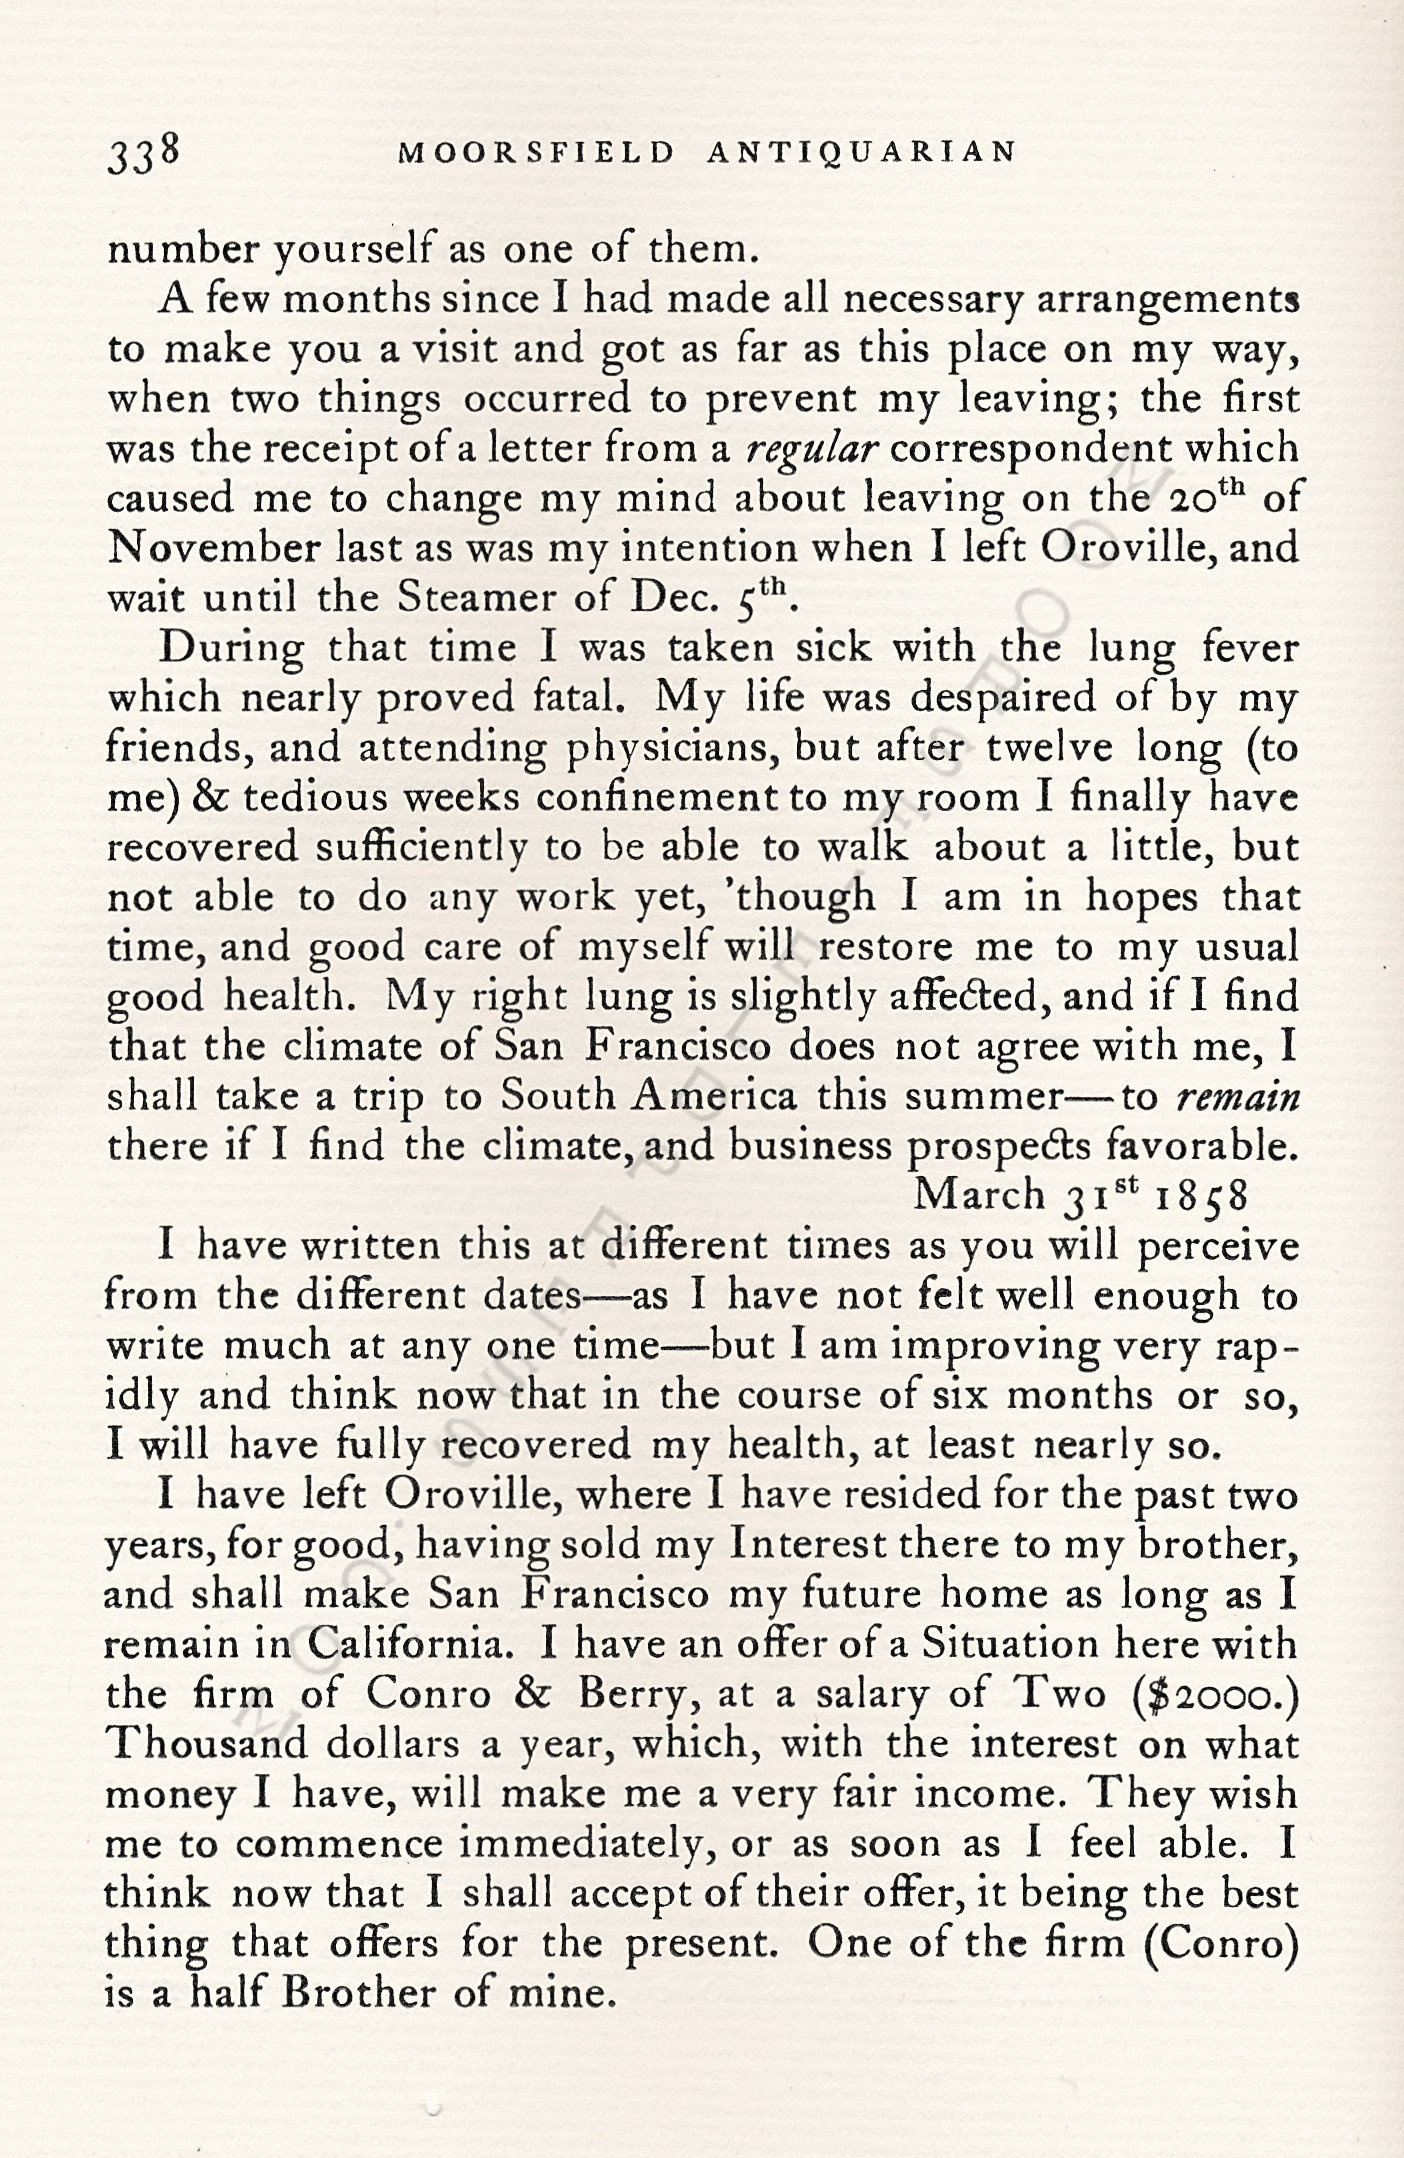 Letters
                      from California-1852-59-Wallace W. Bordwell to
                      Benjamin Booth of Champlain New York